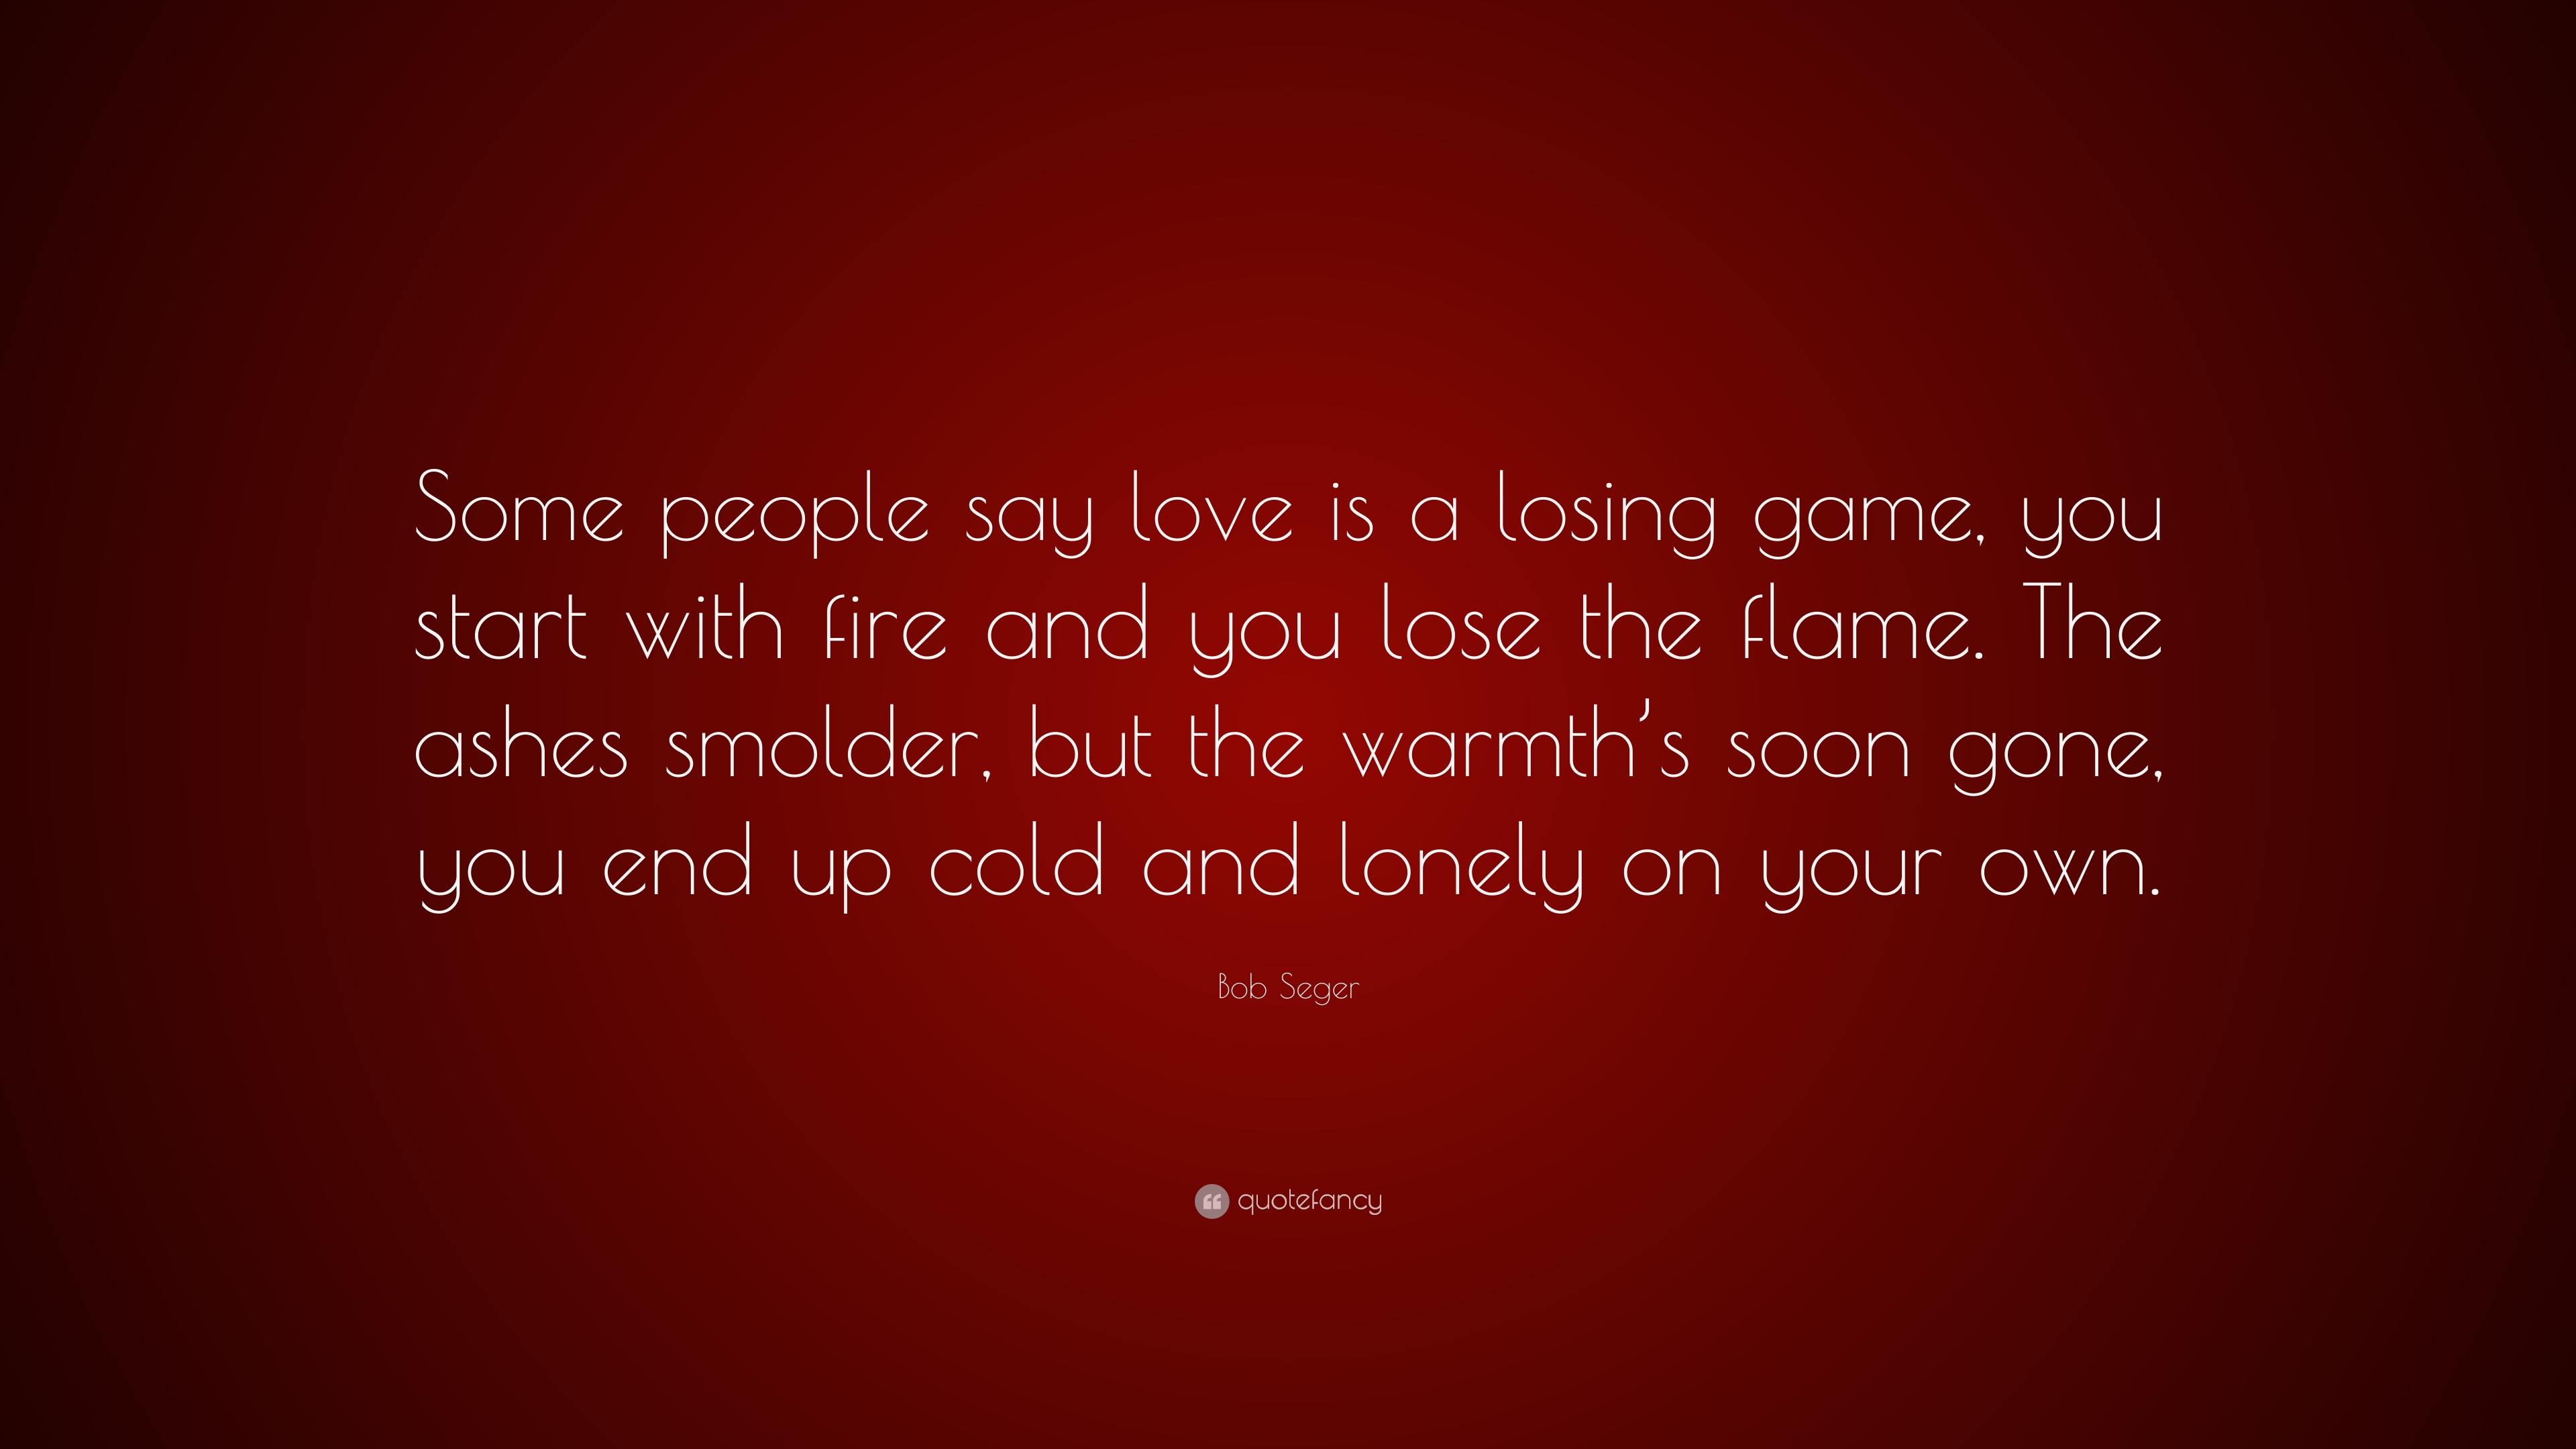 8 Bob Seger Quotes About Love